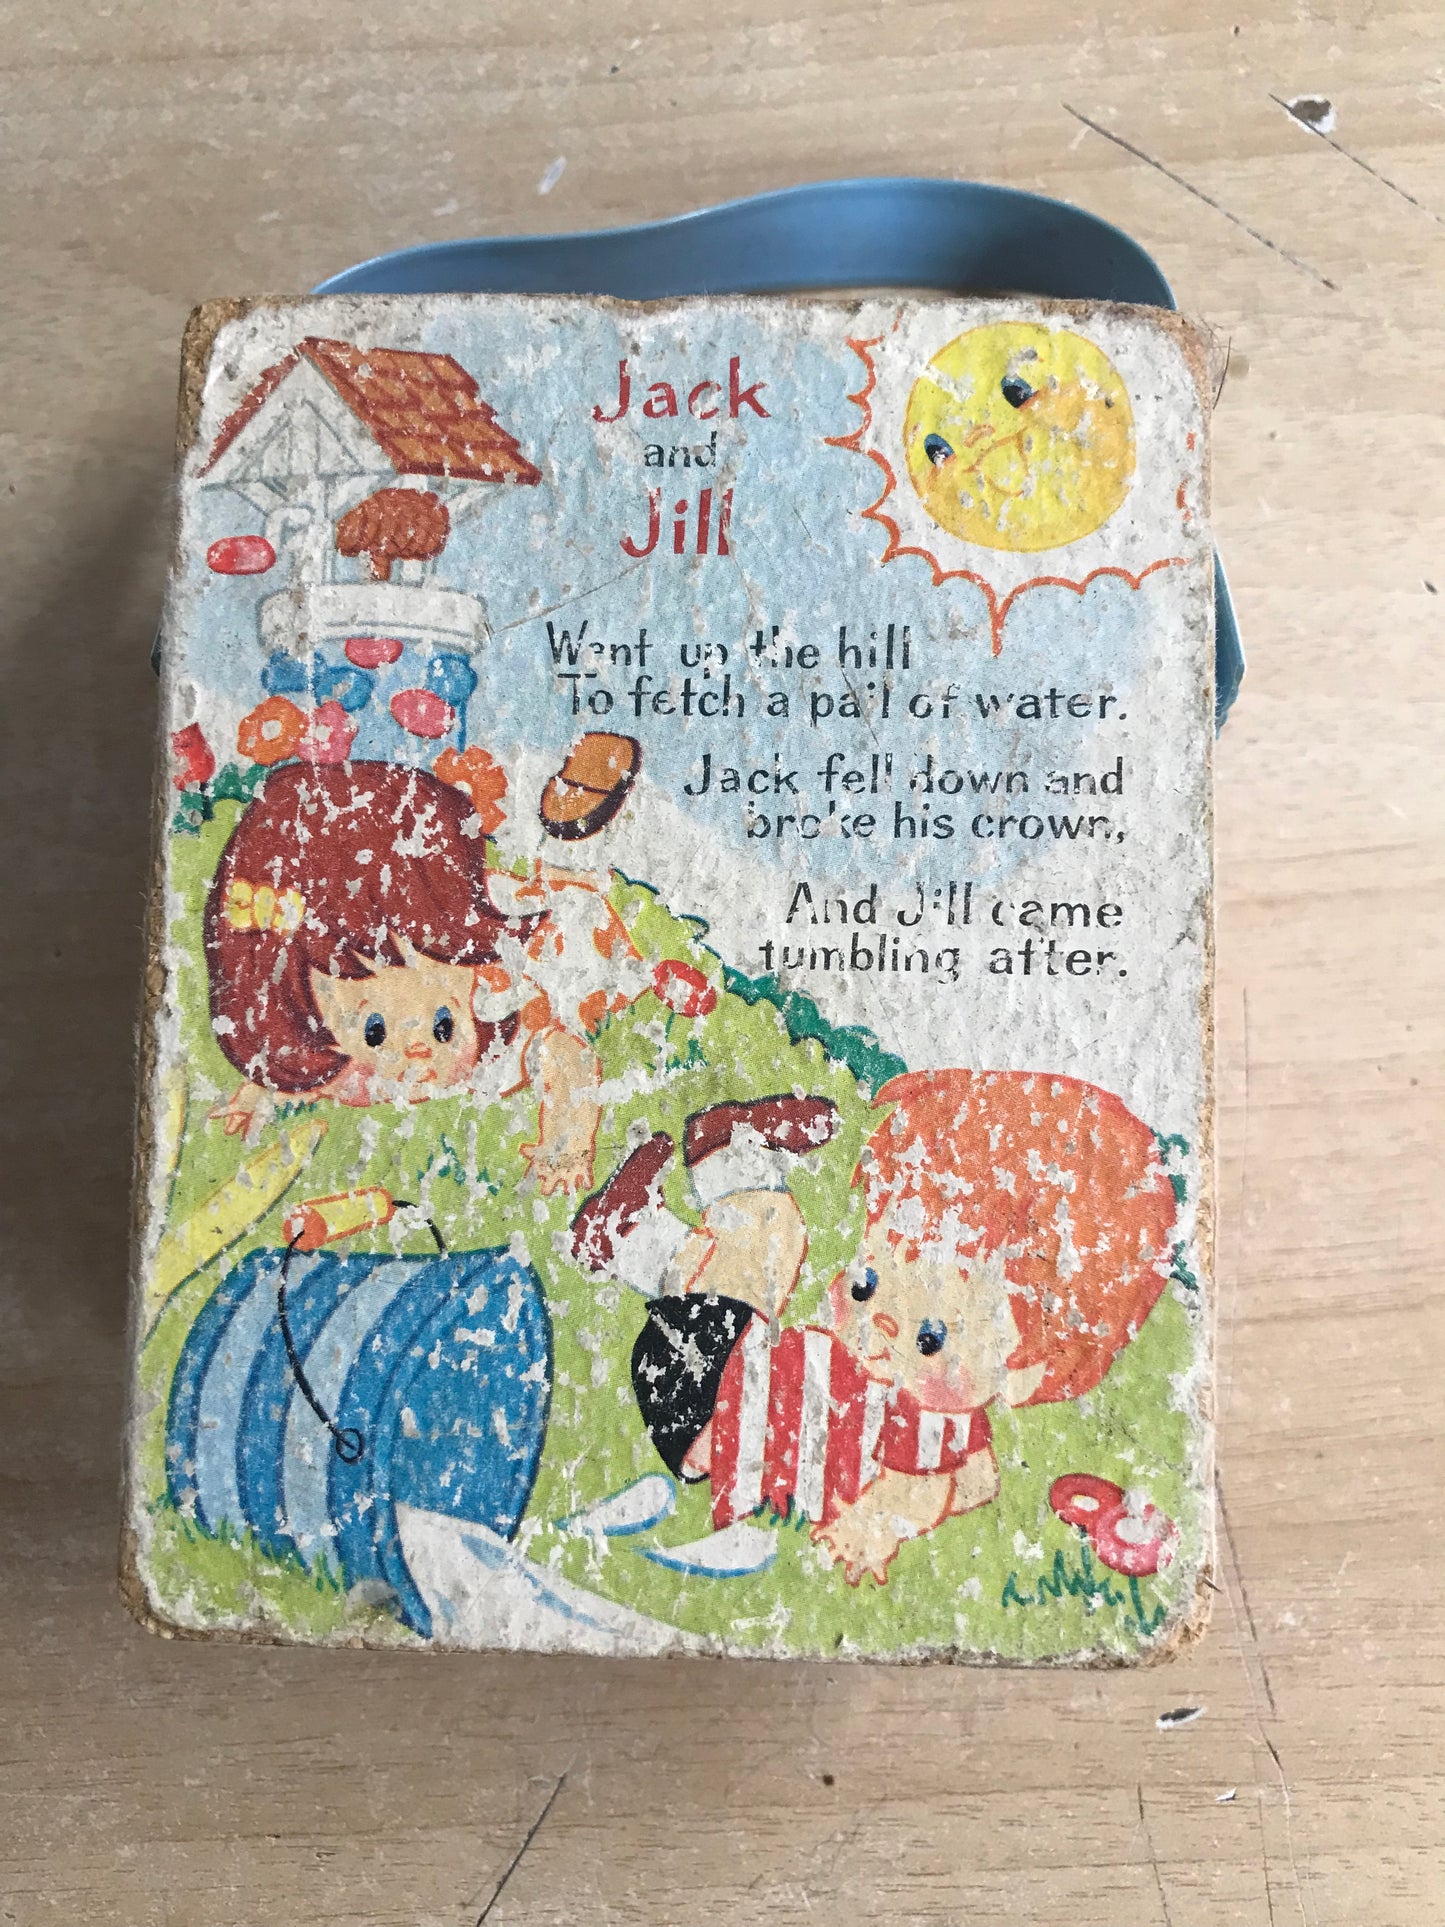 Fisher Price Vintage 1977 Music Box Pocket Radio Jack and Jill Wear Litho Paper Wear Works Great Wood Plastic